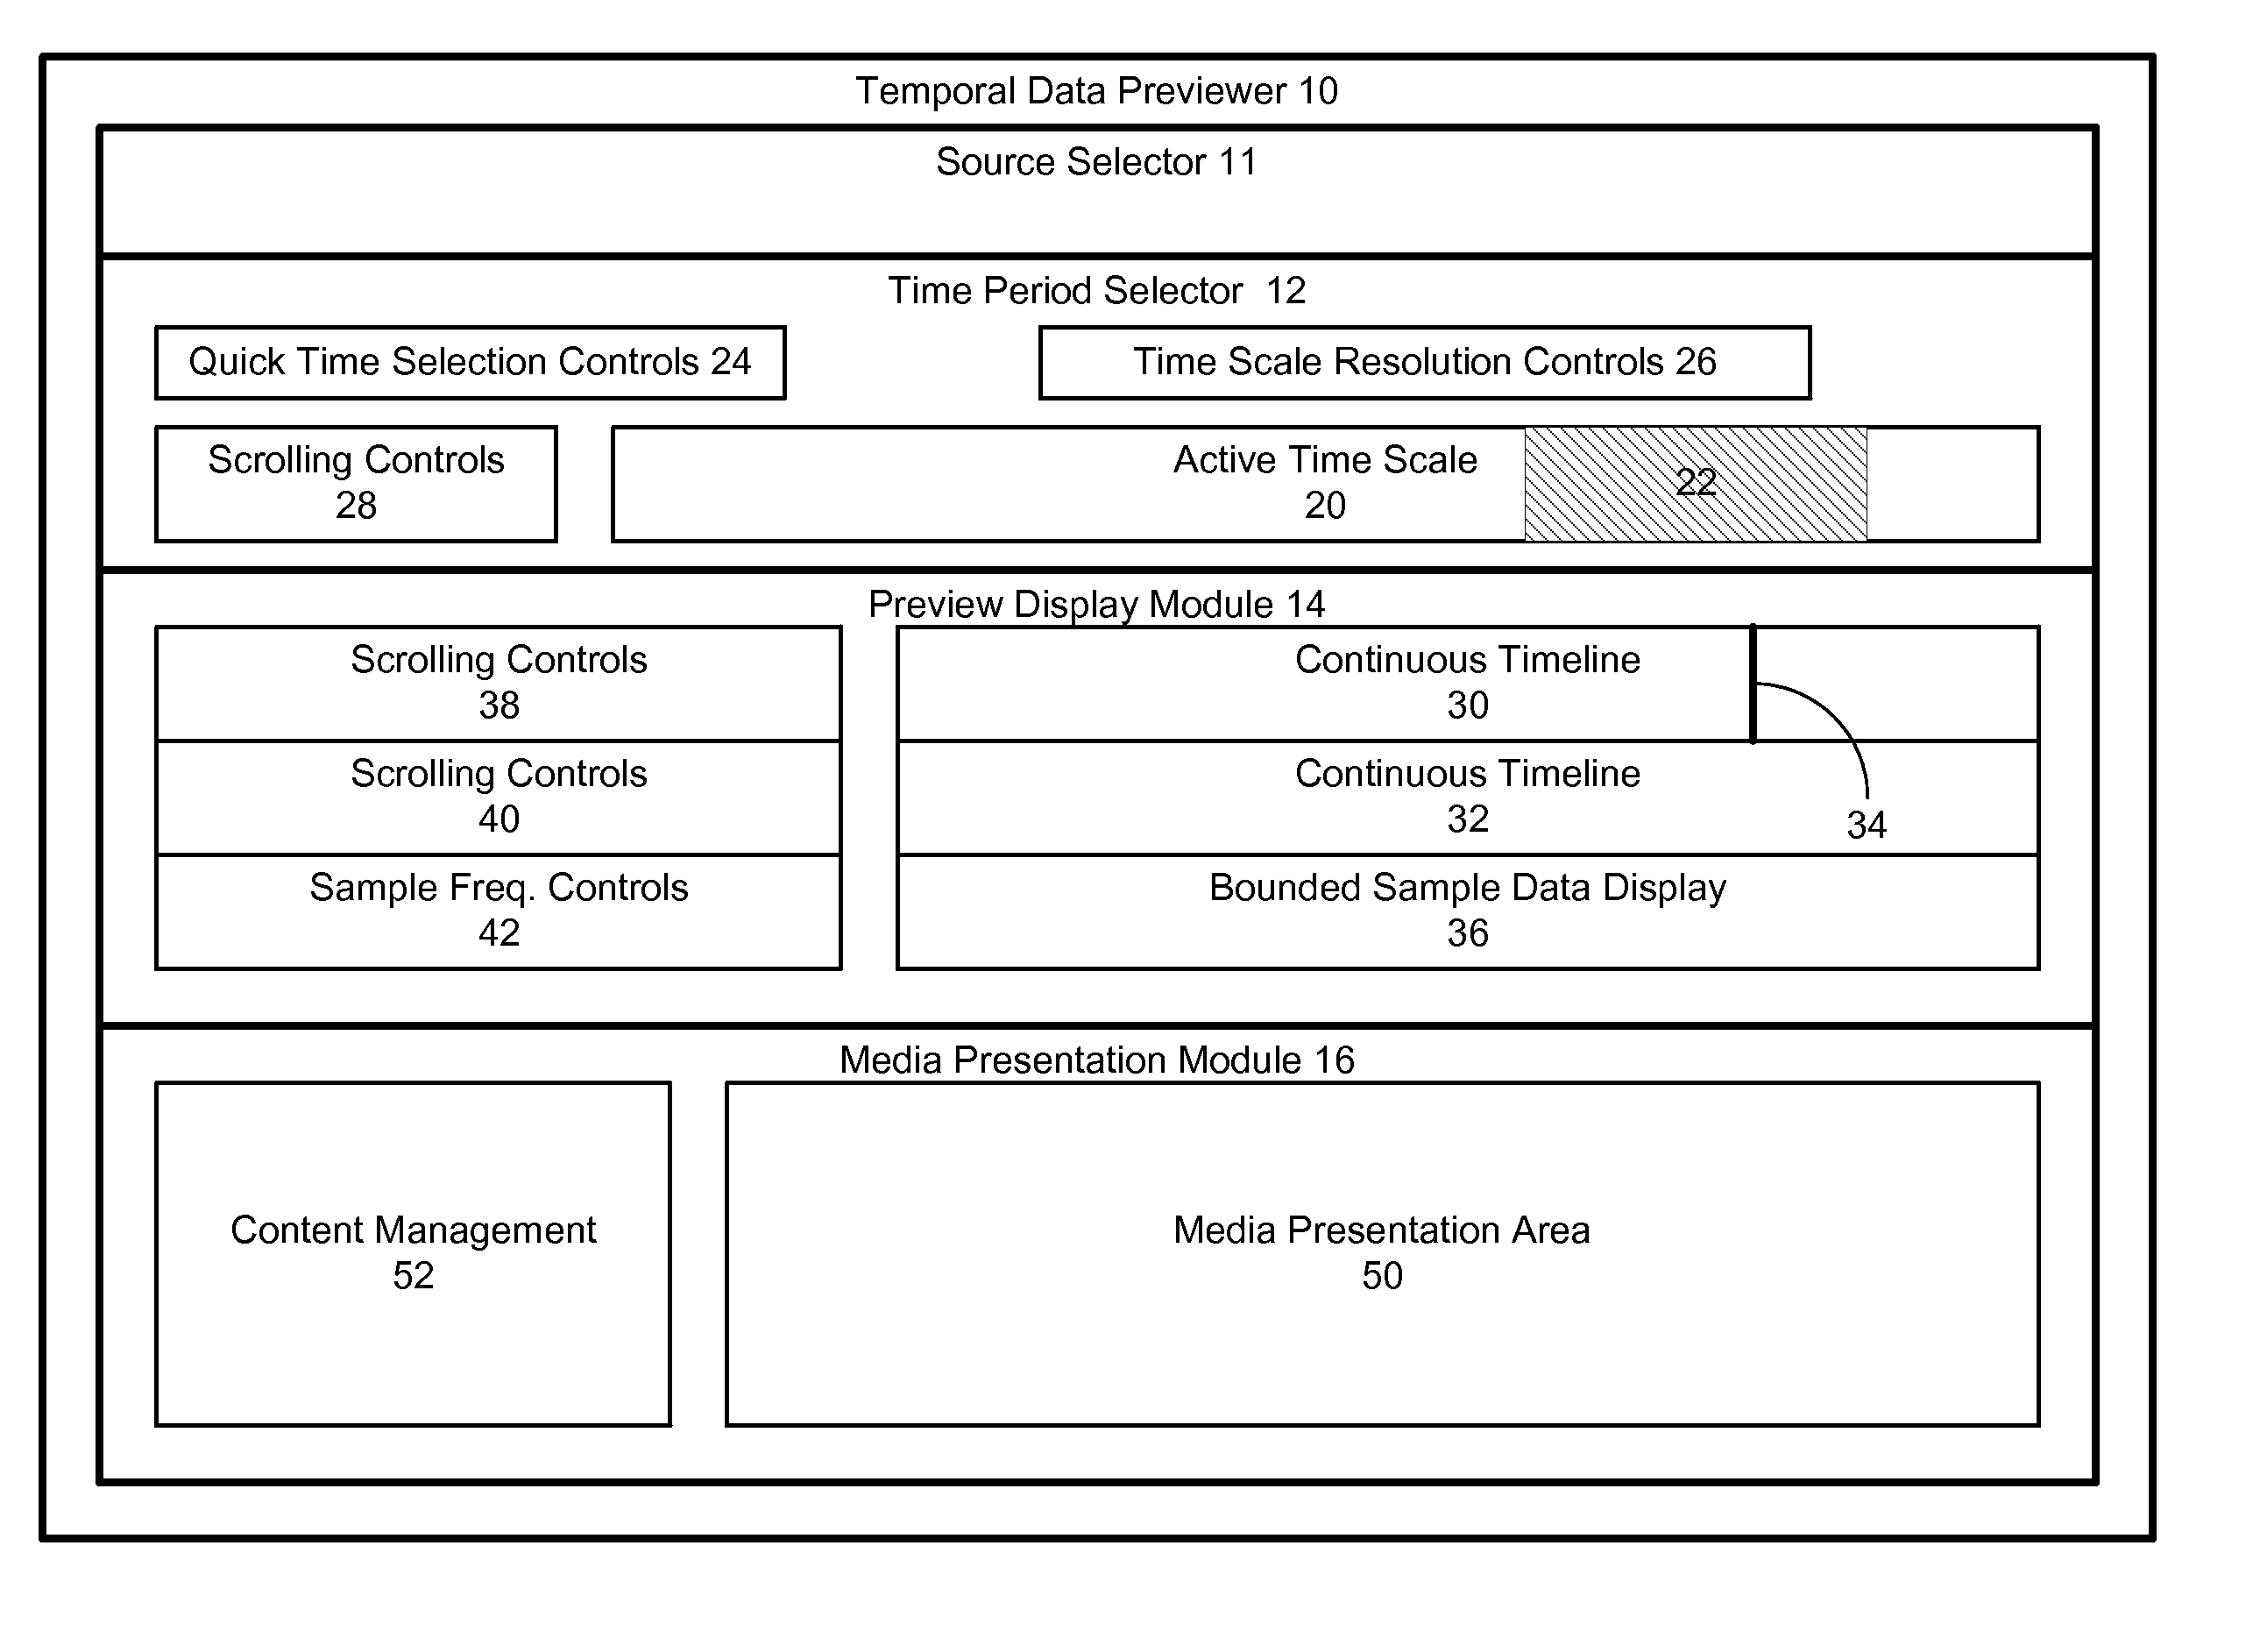 Temporal data previewing system